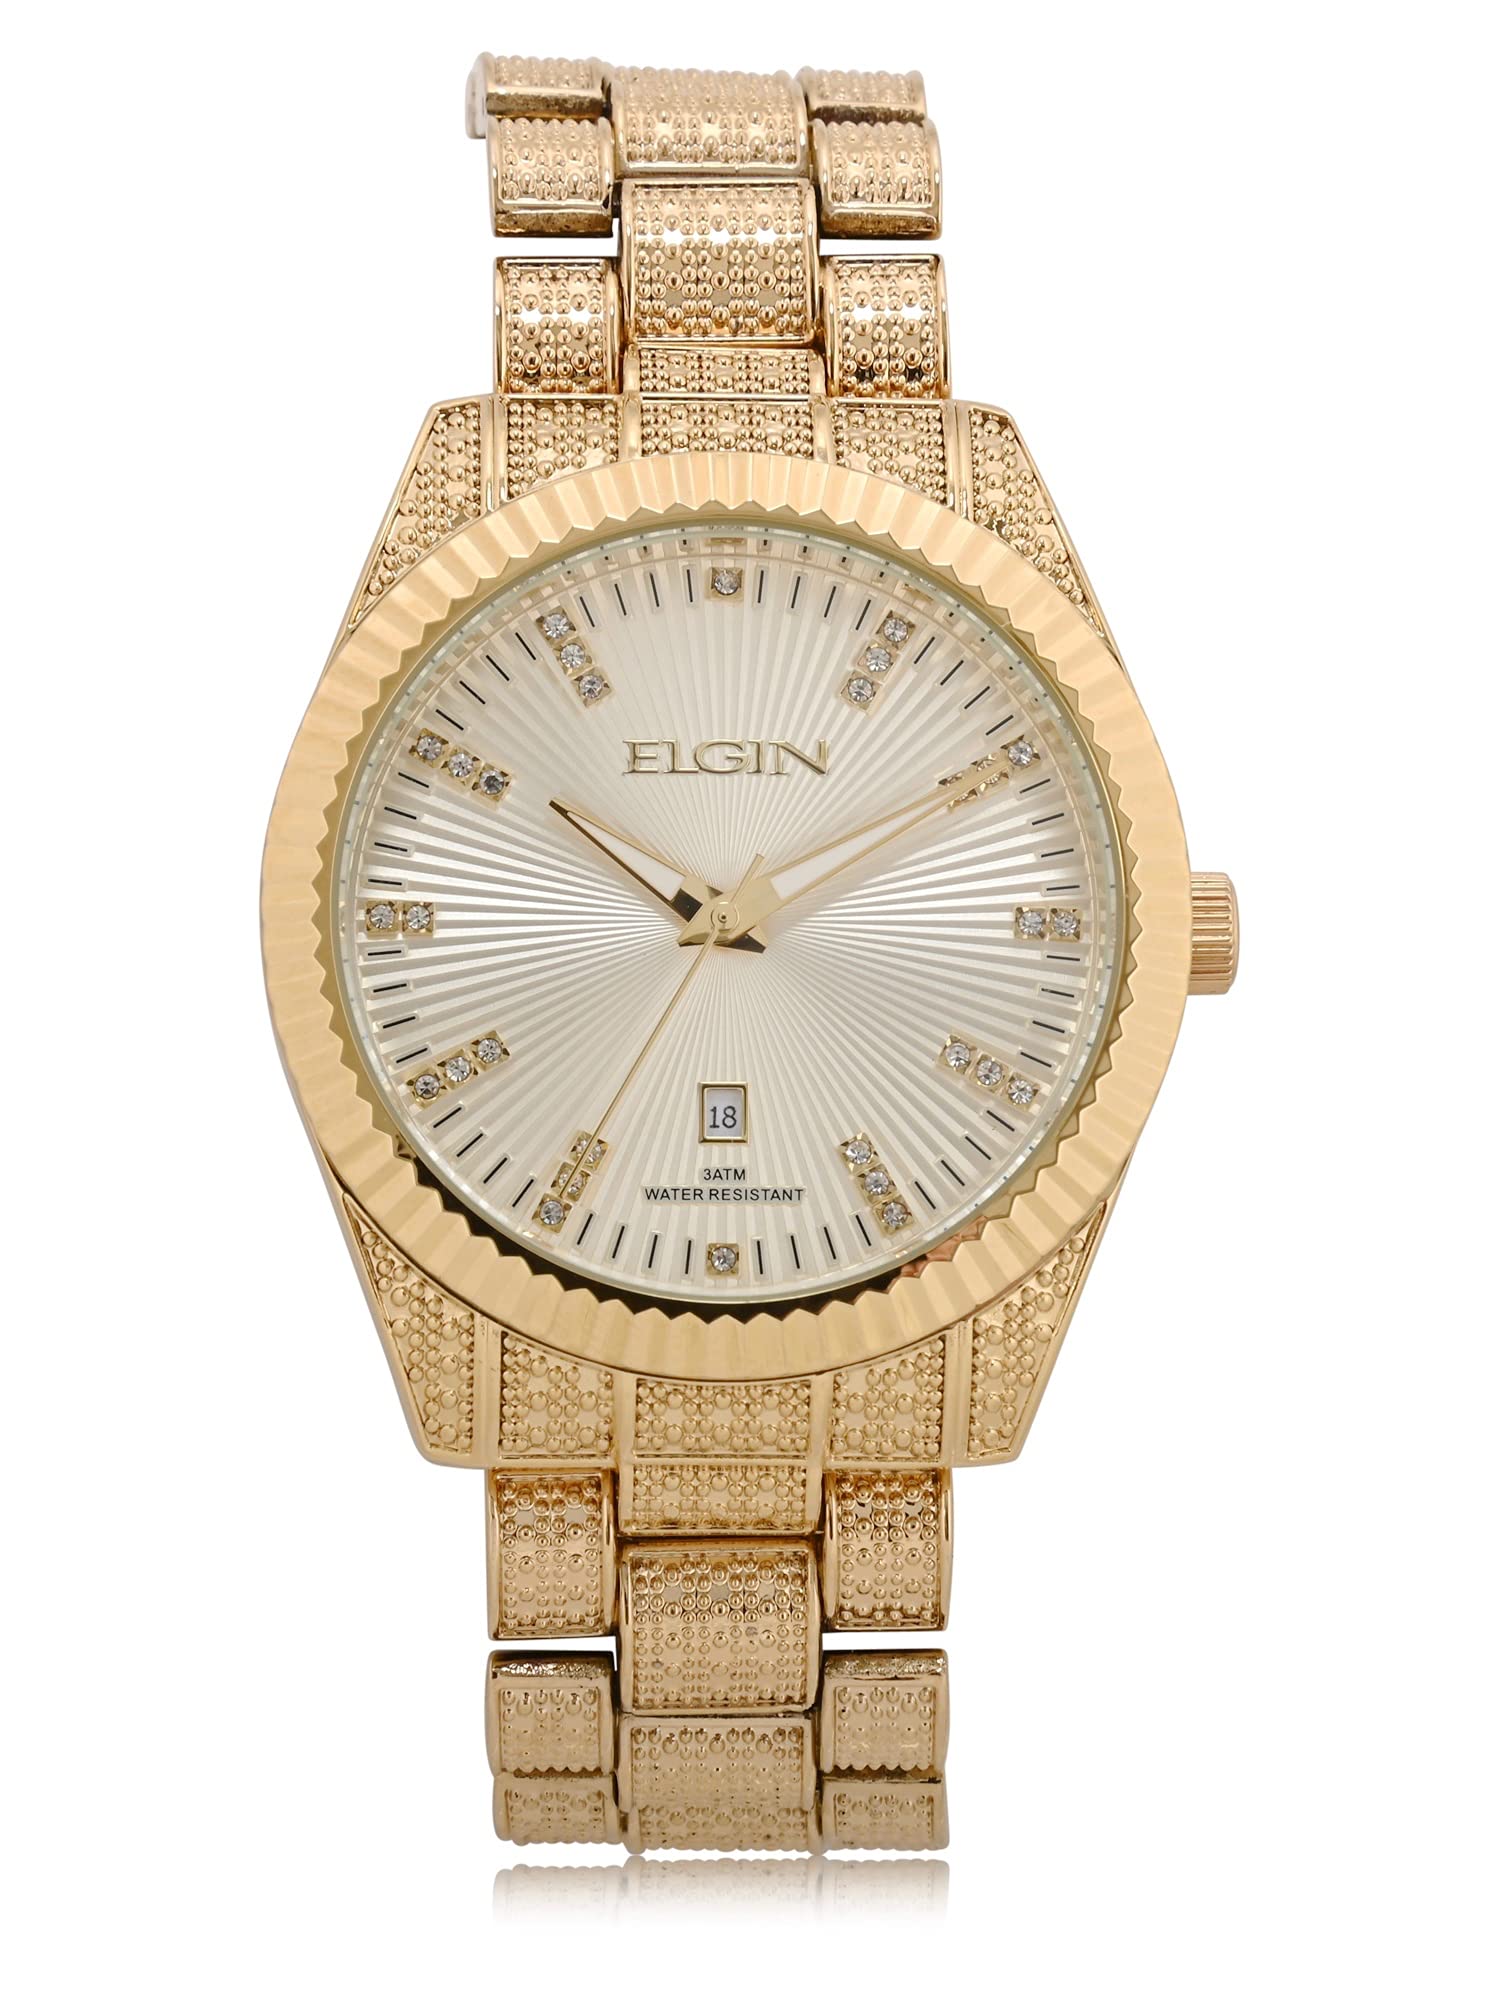 Elgin Men's Gold-Tone Analog Watch with Hammered Accents (Model FG160096AZ)